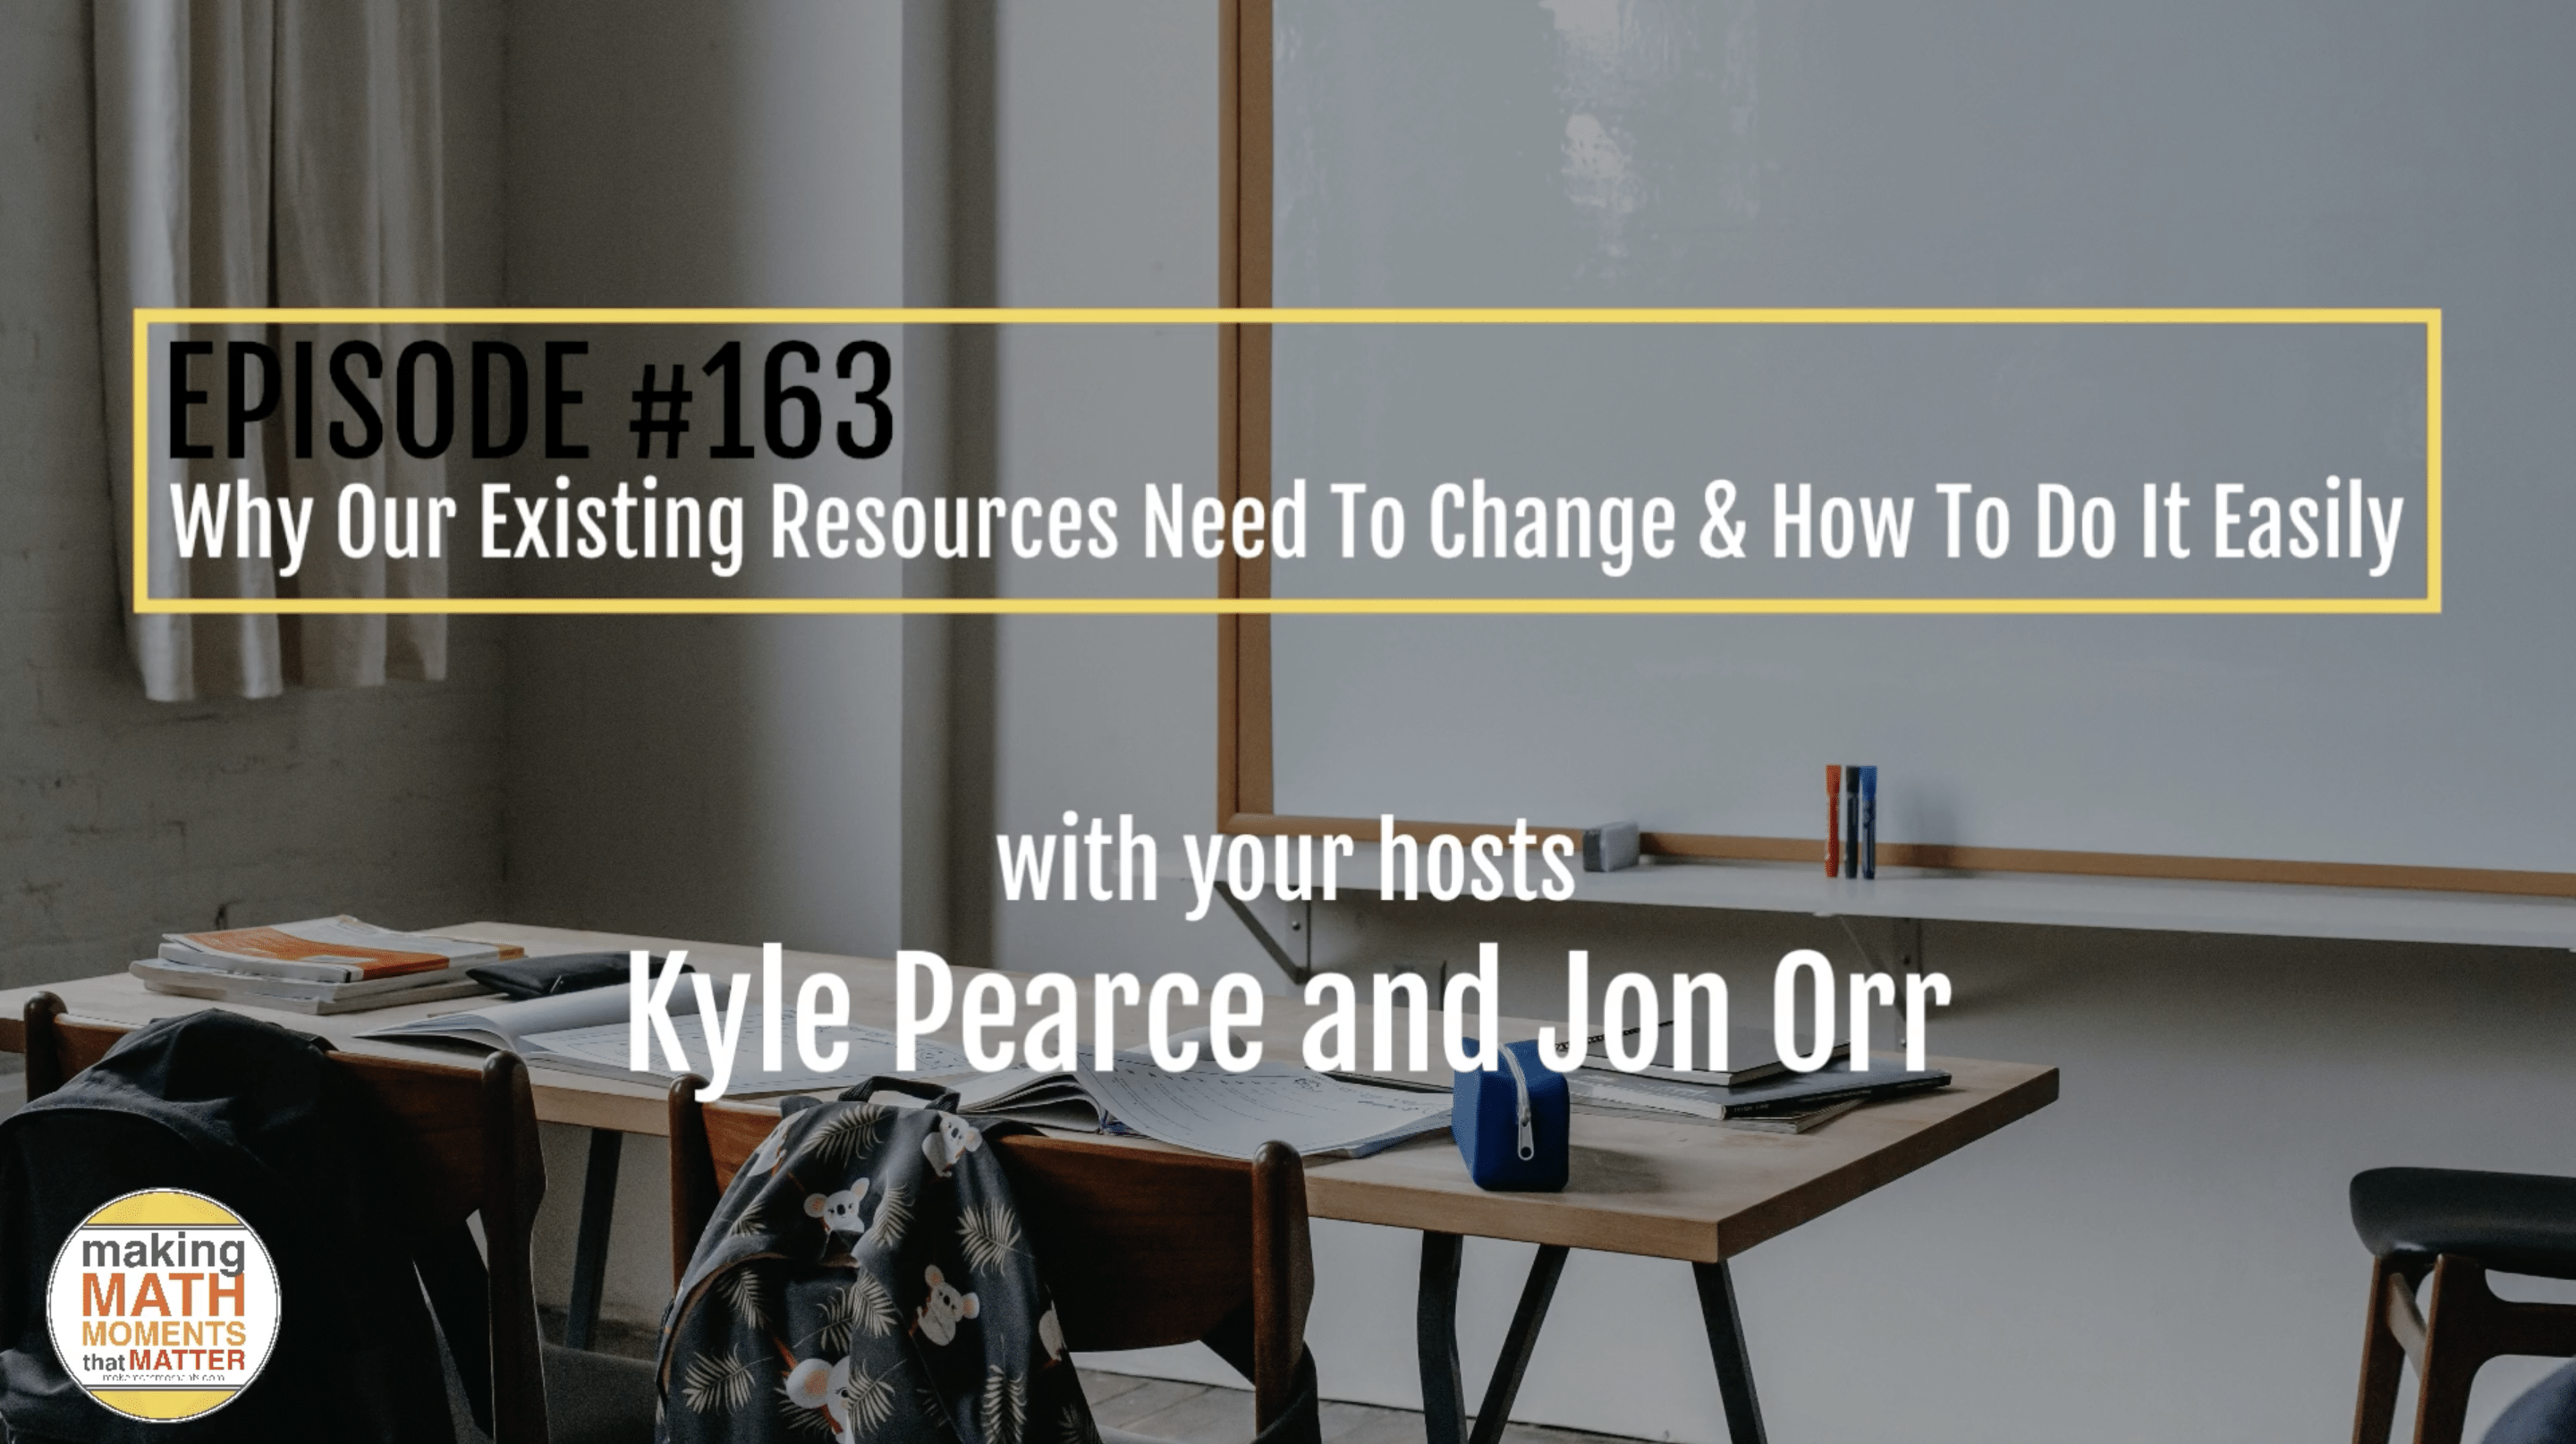 Episode 163: Why Our Existing Resources Need To Change & How To Do It Easily